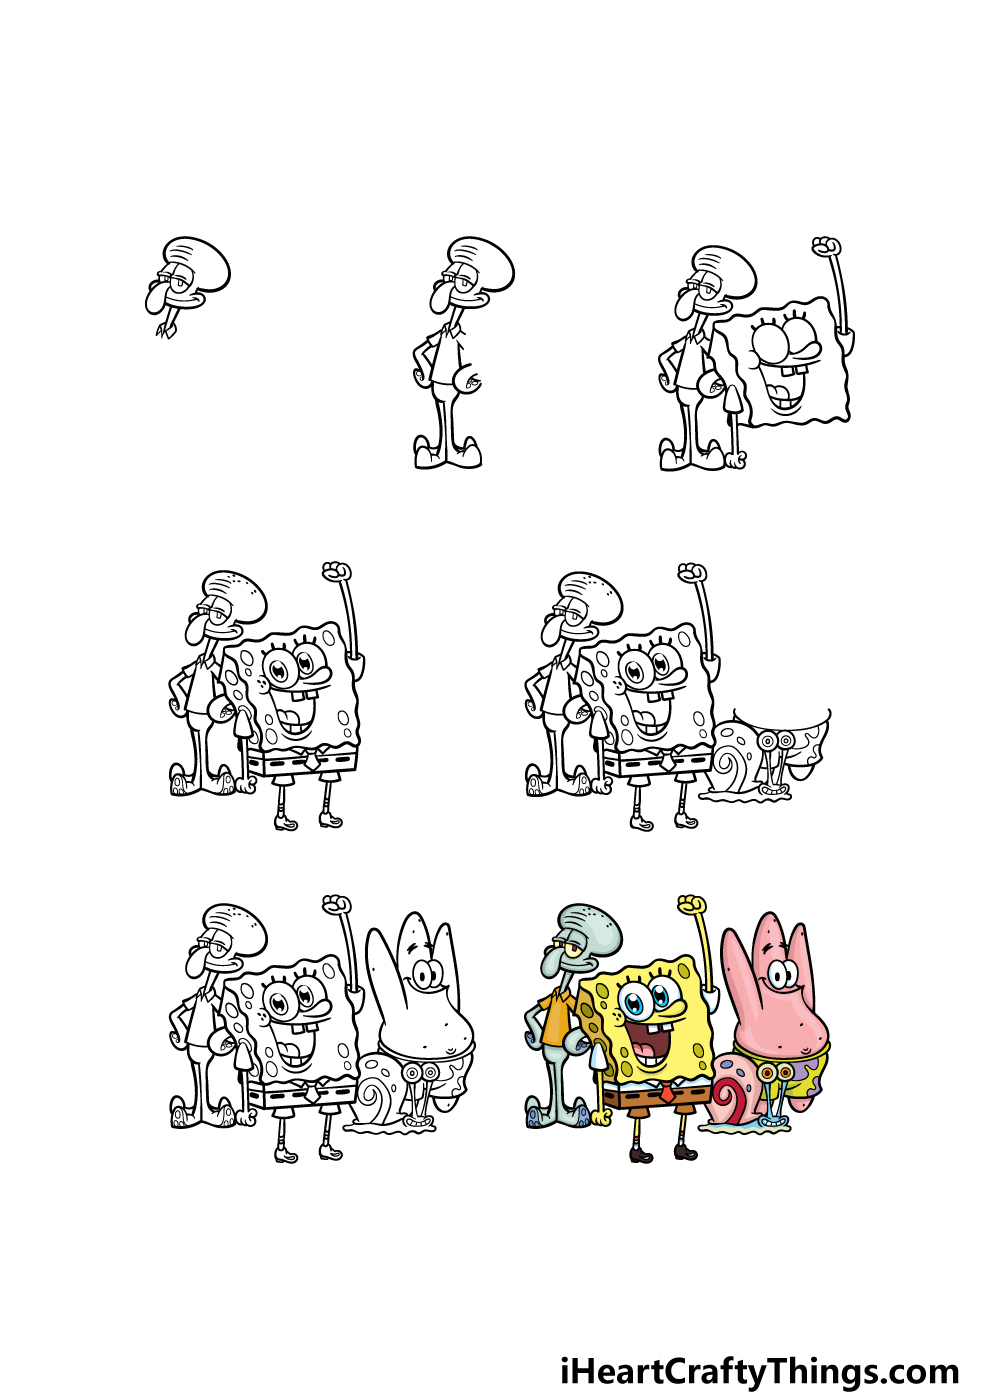 Spongebob Characters Drawing - How To Draw Spongebob Characters Step By Step